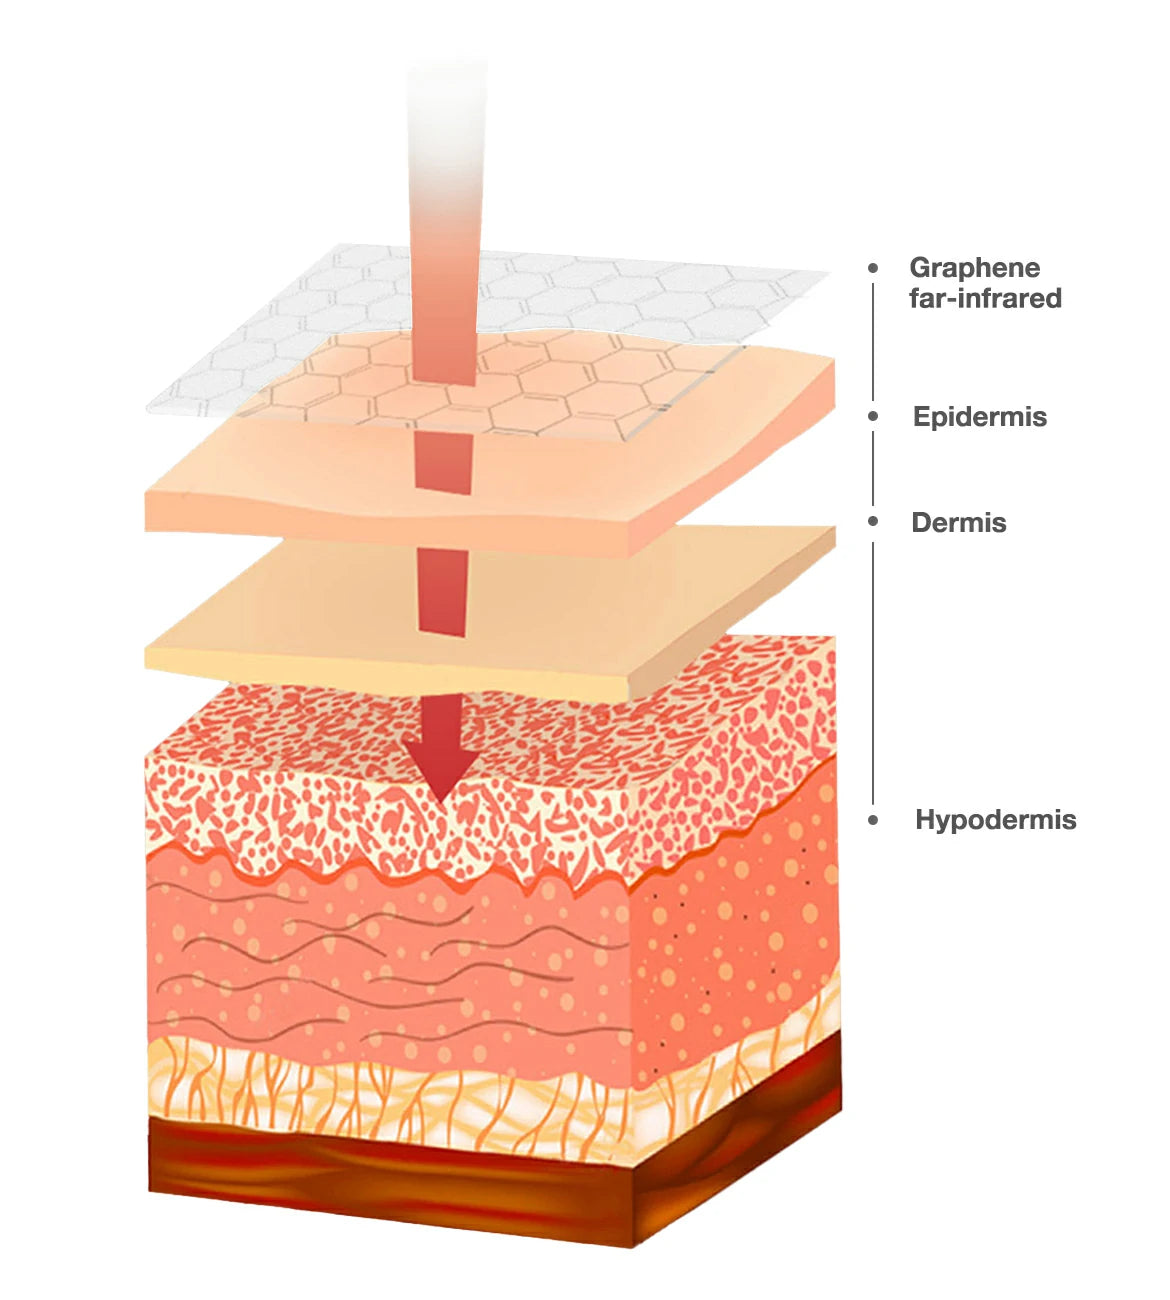 Illustrative cross-section of skin showing graphene far-infrared technology penetration through epidermis, dermis, and hypodermis layers for enhanced skincare.